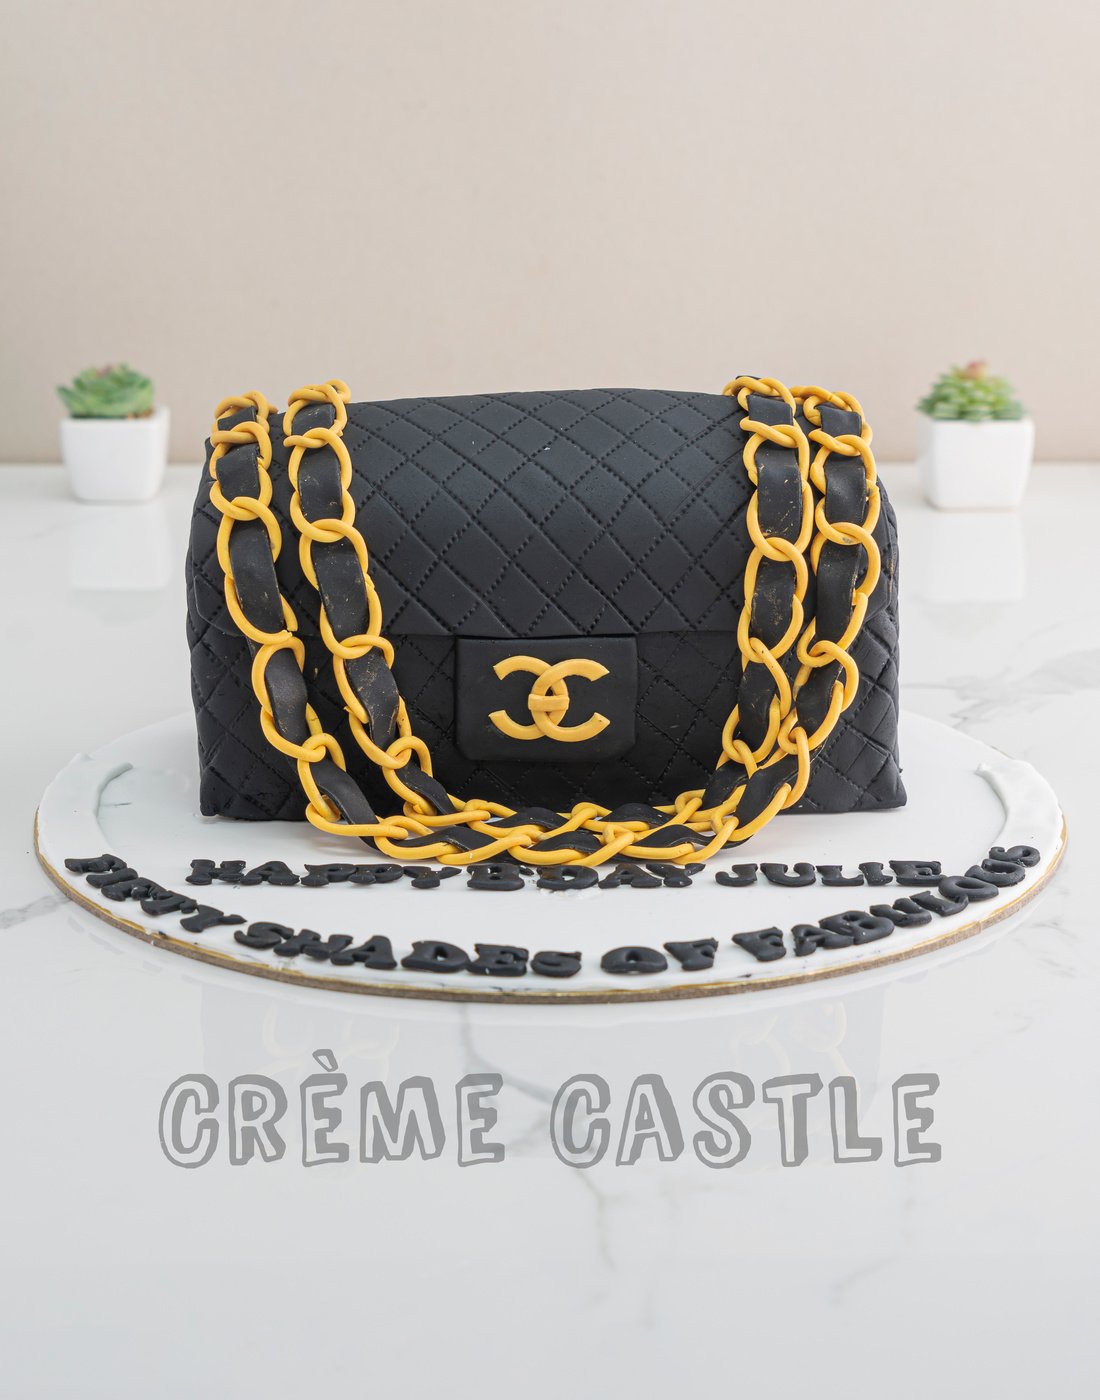 Top That!: Suitcase & Make-up bag cake! {Penny's 30th birthday}